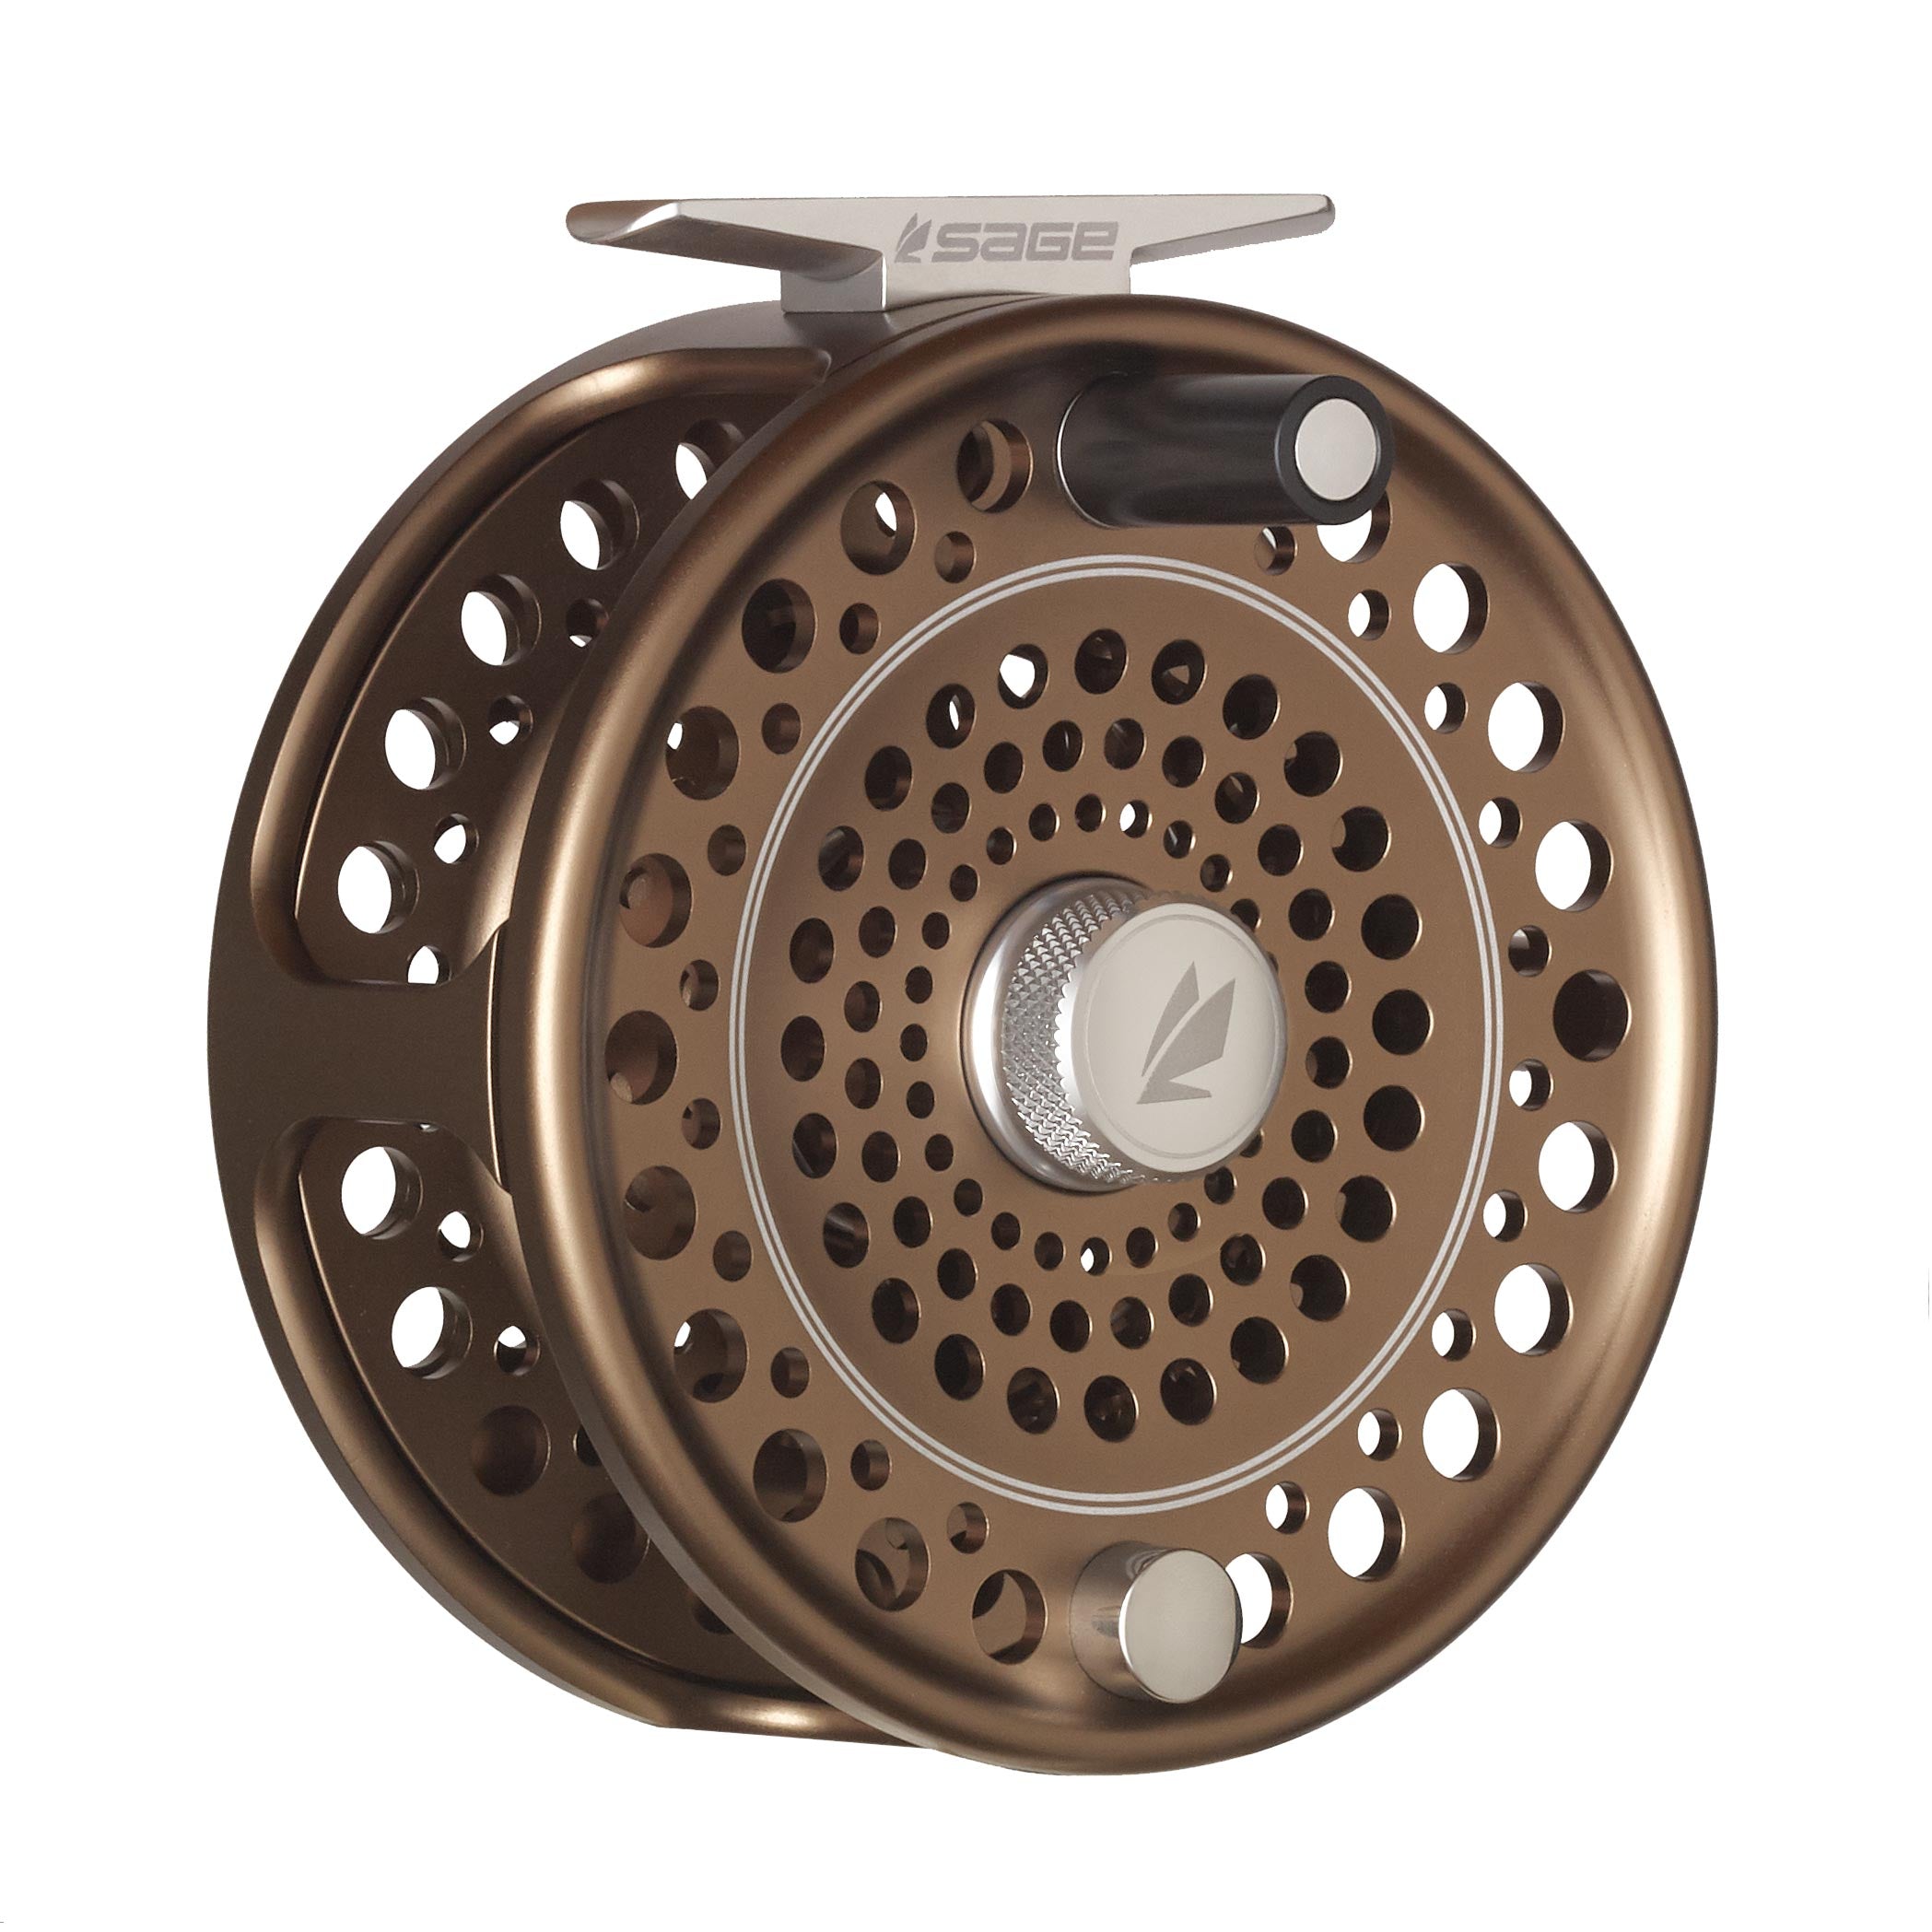 Sage SPEY Fly Reel in Bronze - Discontinued